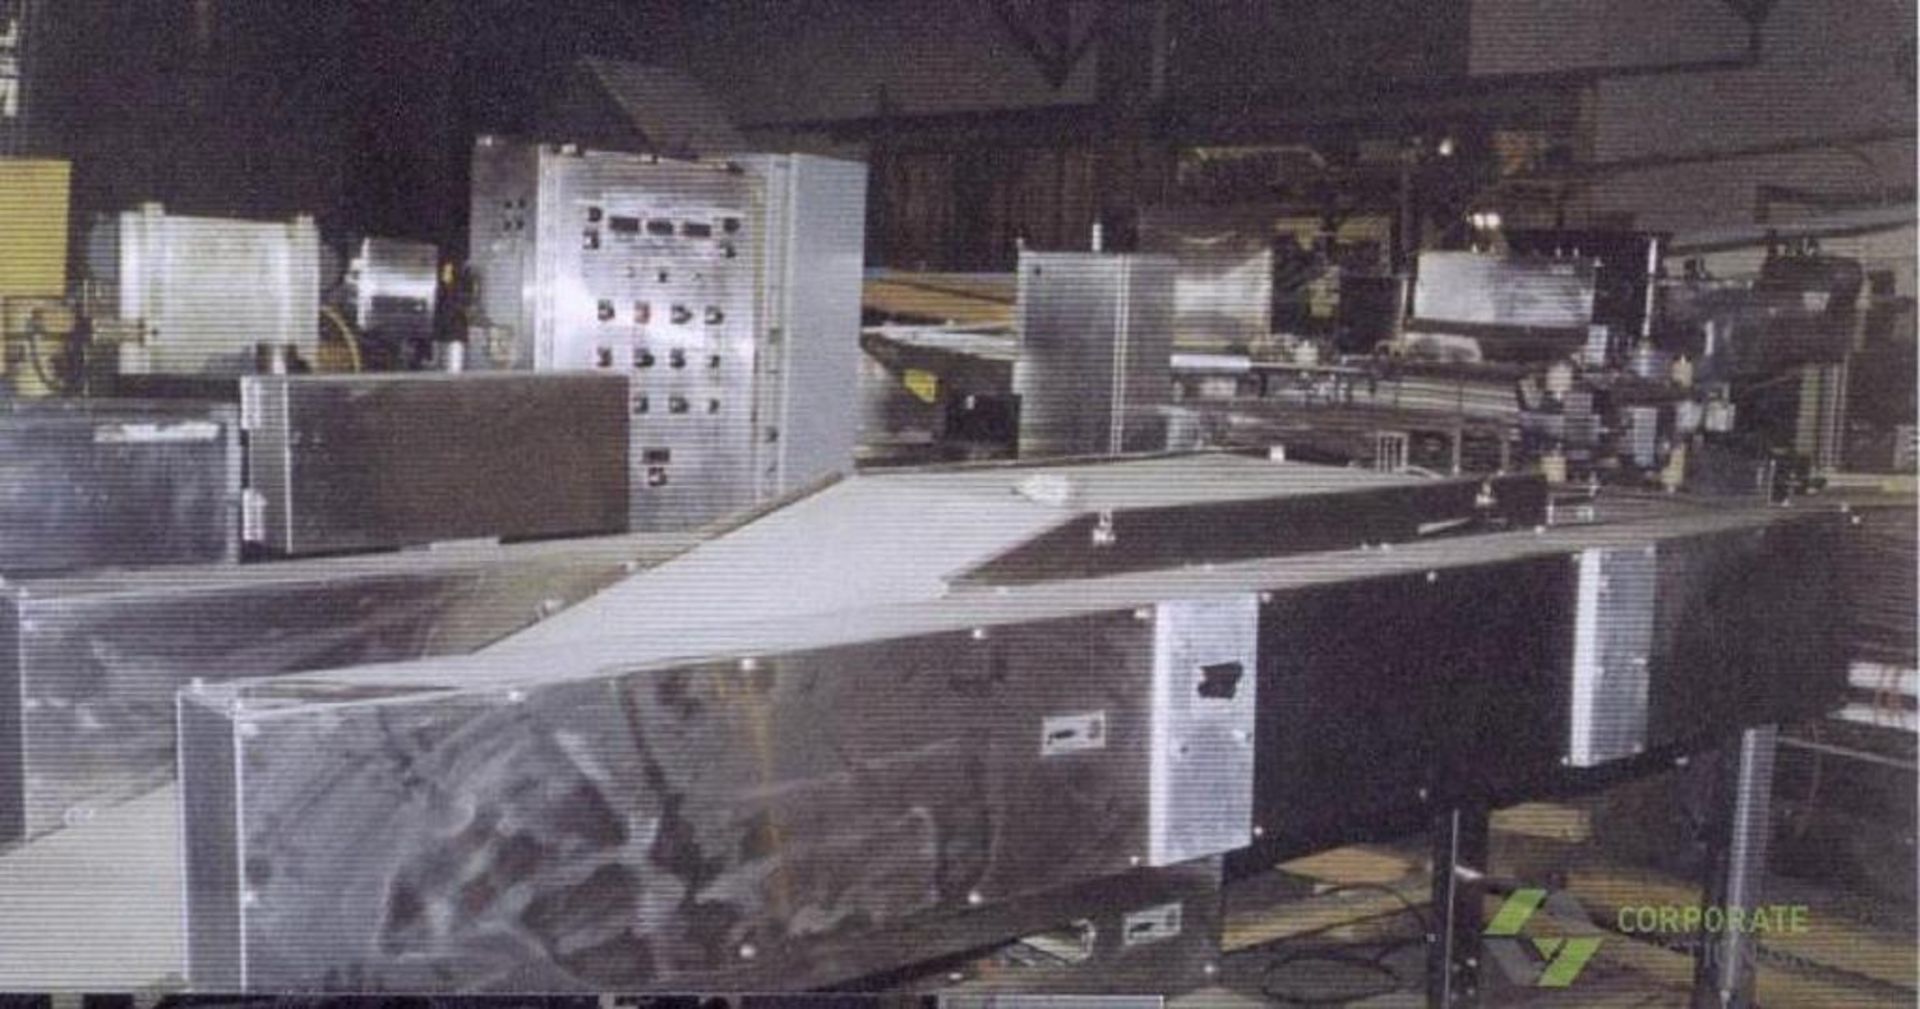 1987 Rheon Laminator/Sheeter, Model: MM 303, S/N: 97, 7.985kw motor, Includes Extruder capable of 30 - Image 9 of 13